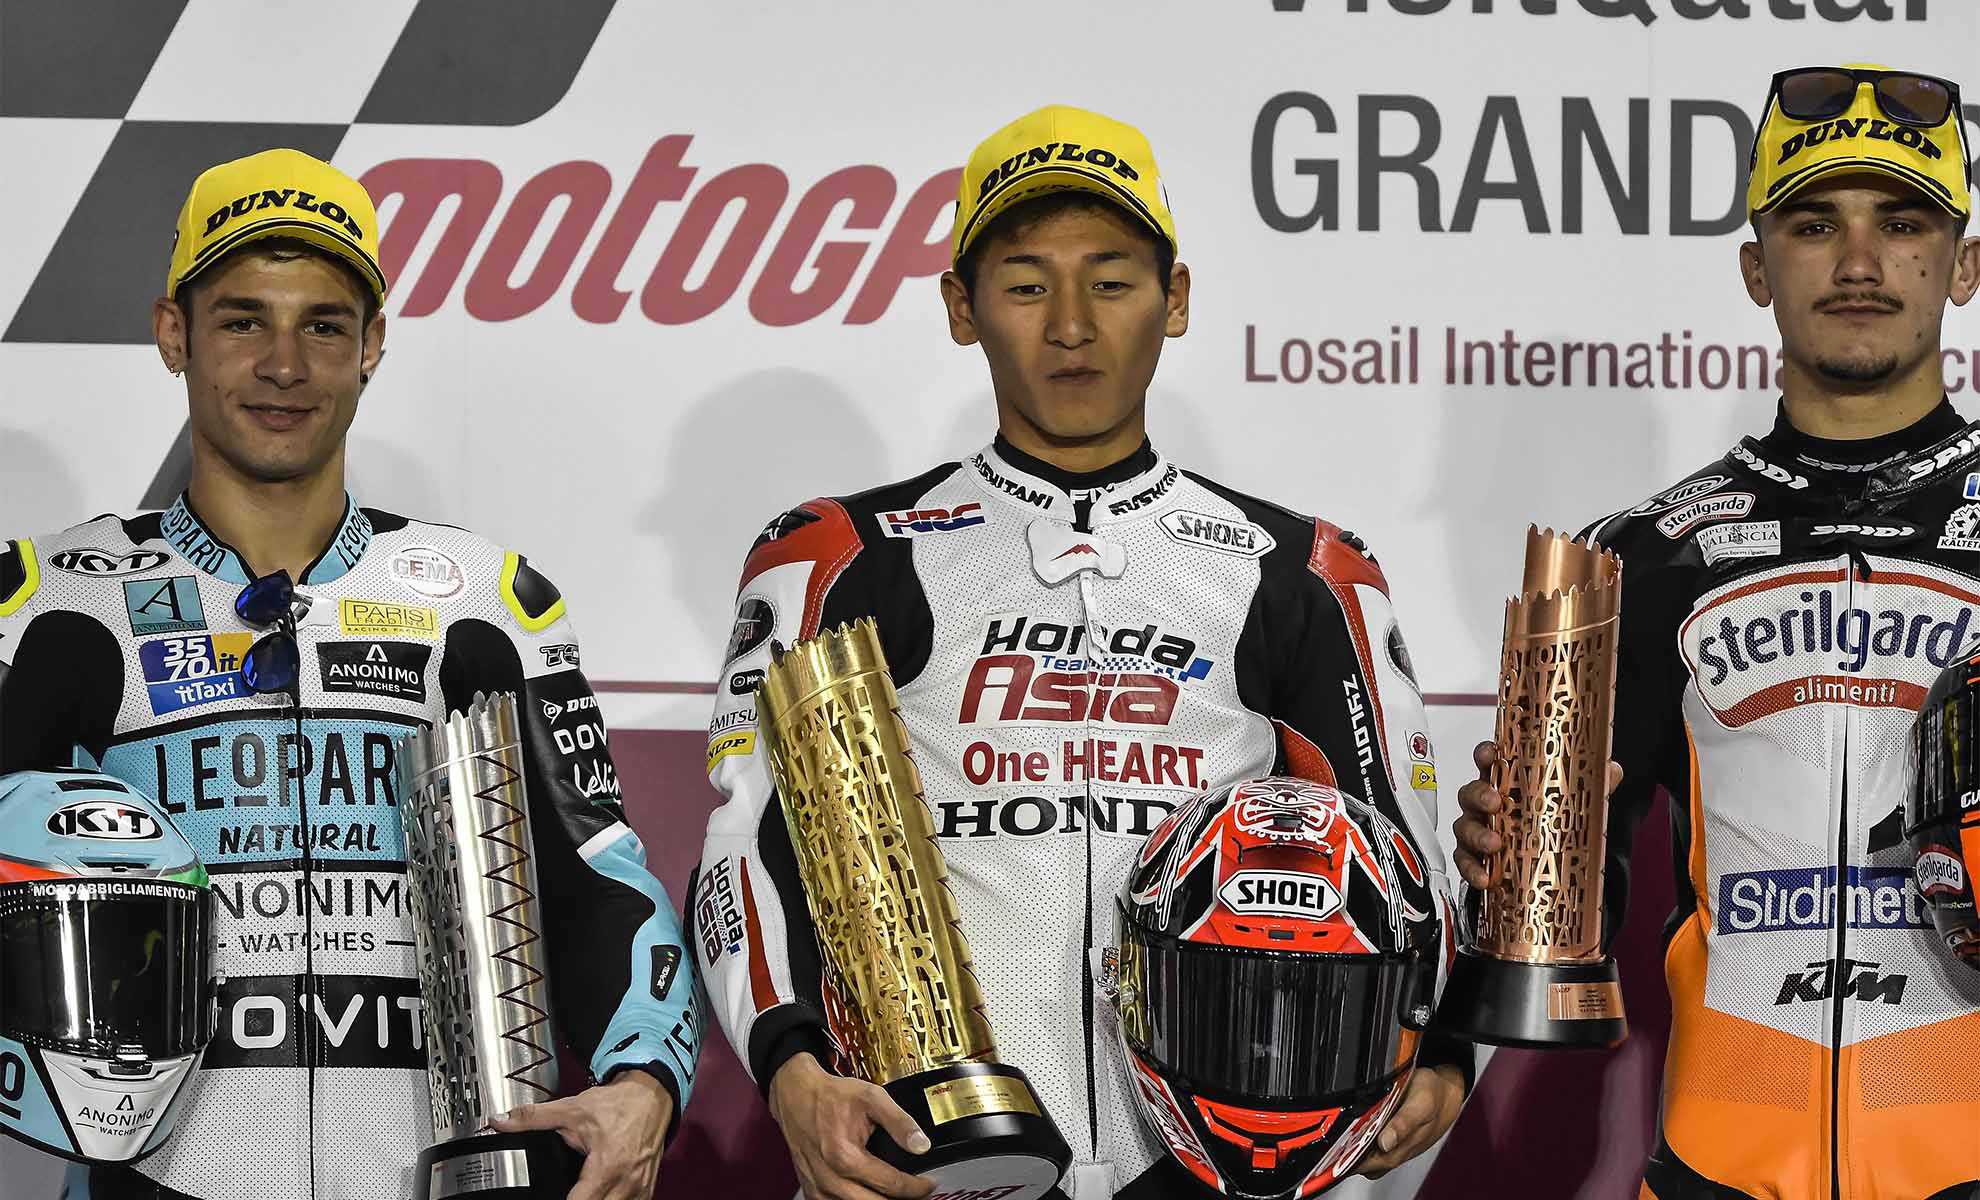 Toba makes history with first Moto3™ win